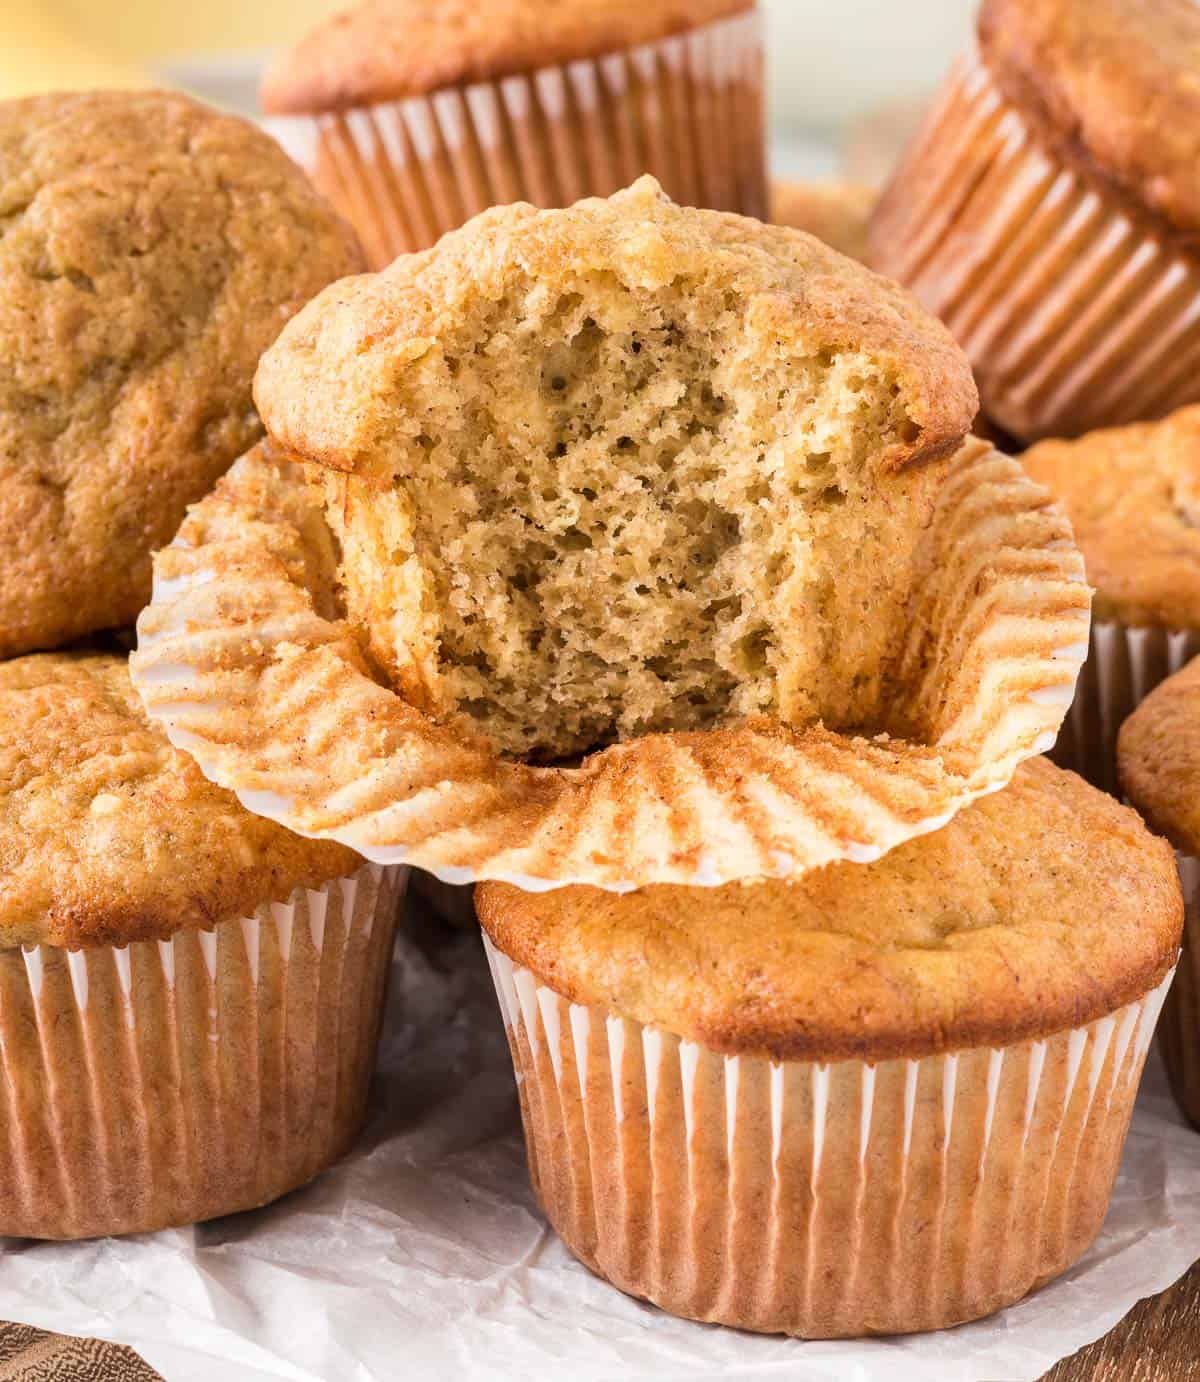 banana muffin with a bite taken out